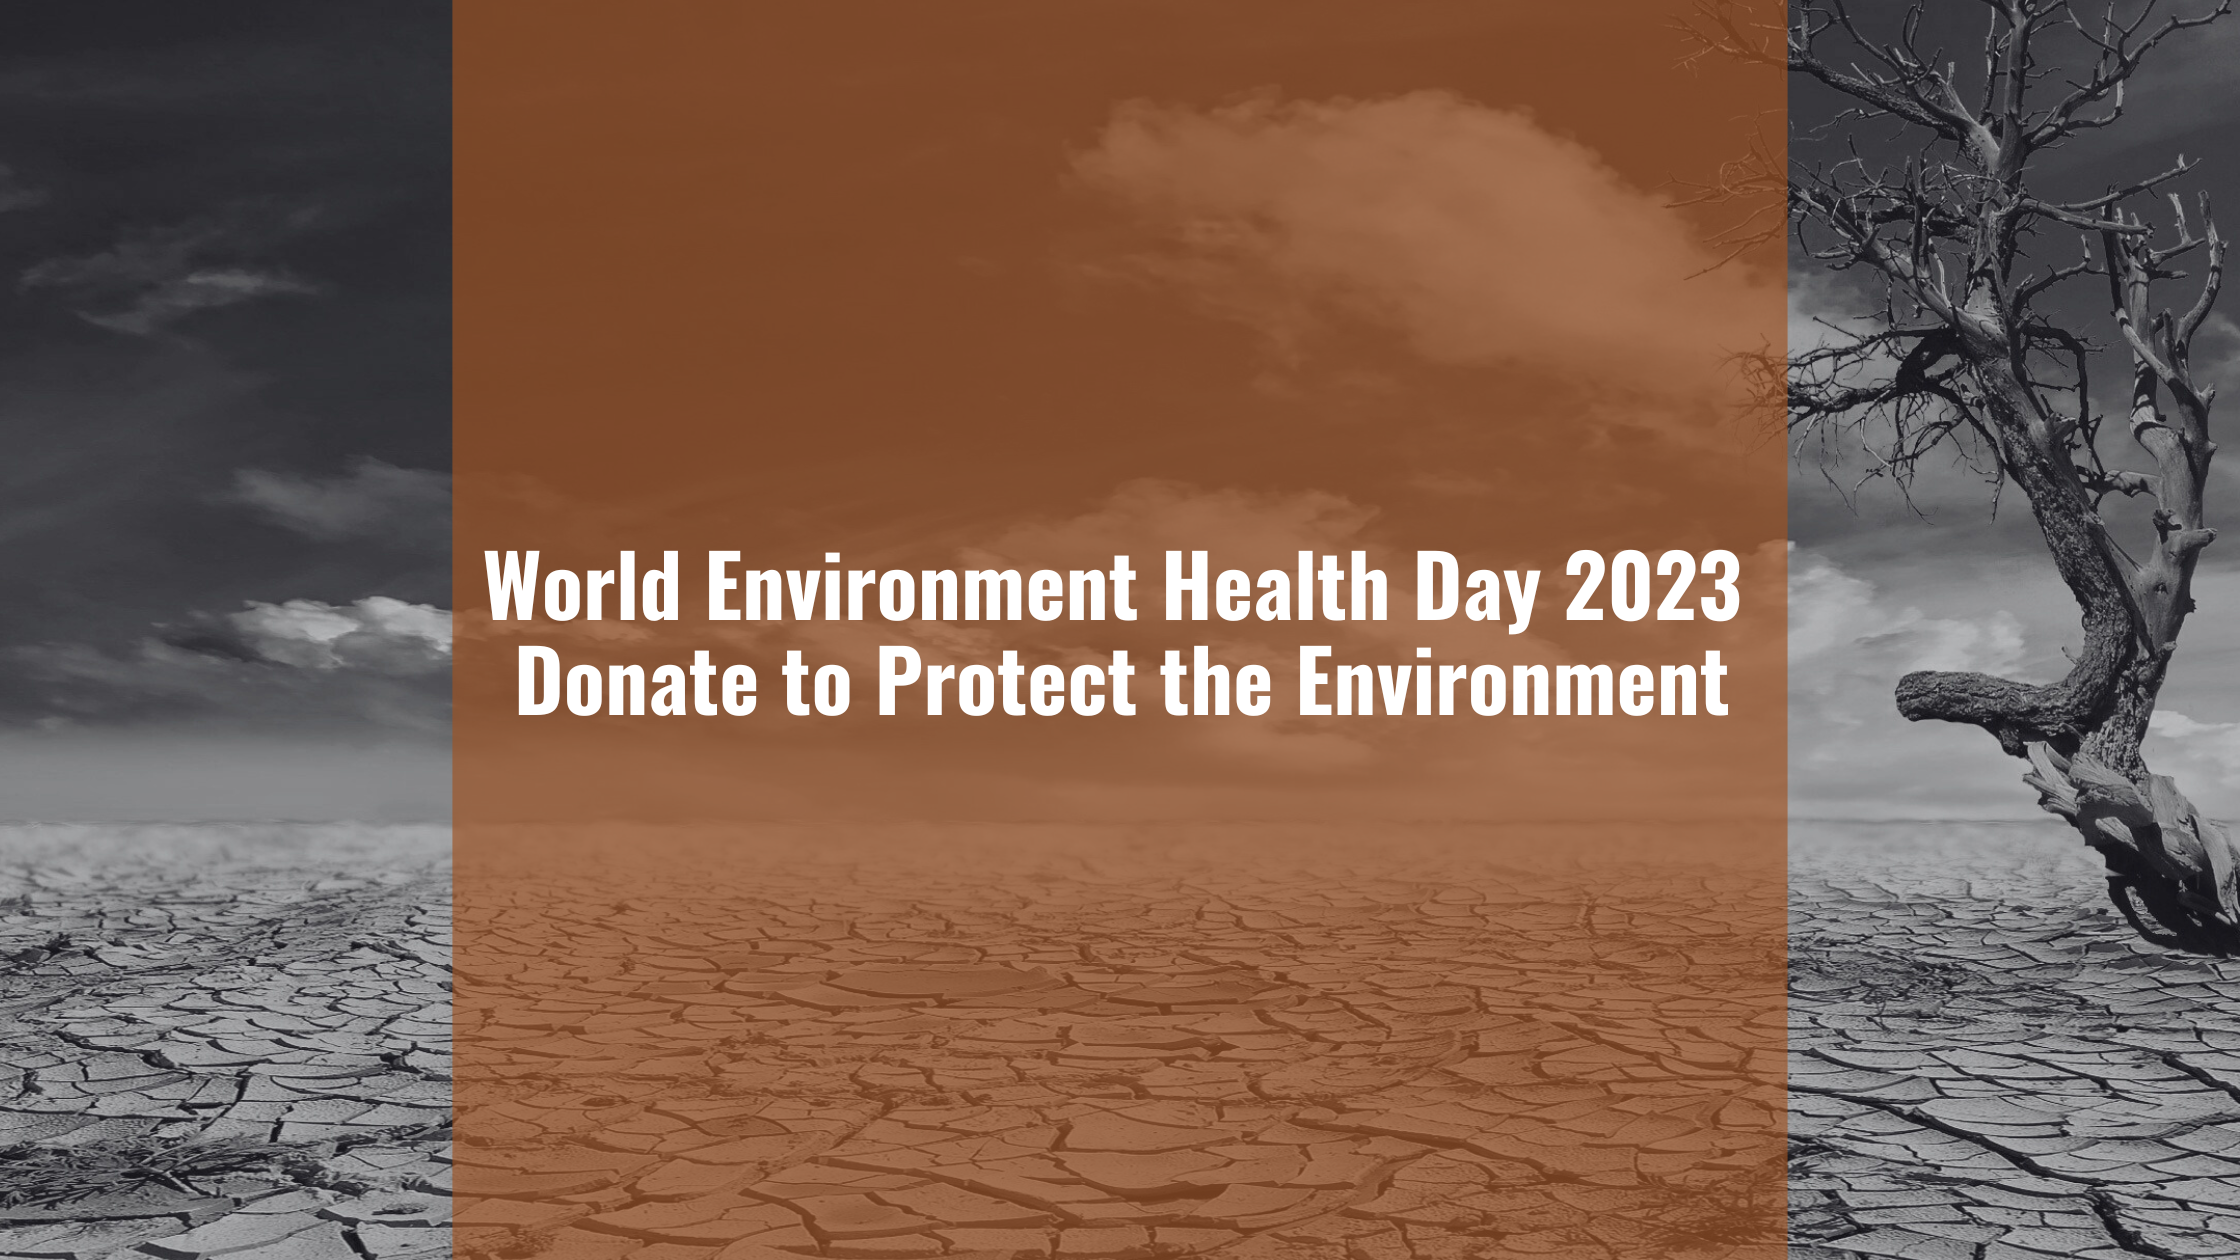 World Environment Health Day 2023 Donate to Protect the Environment